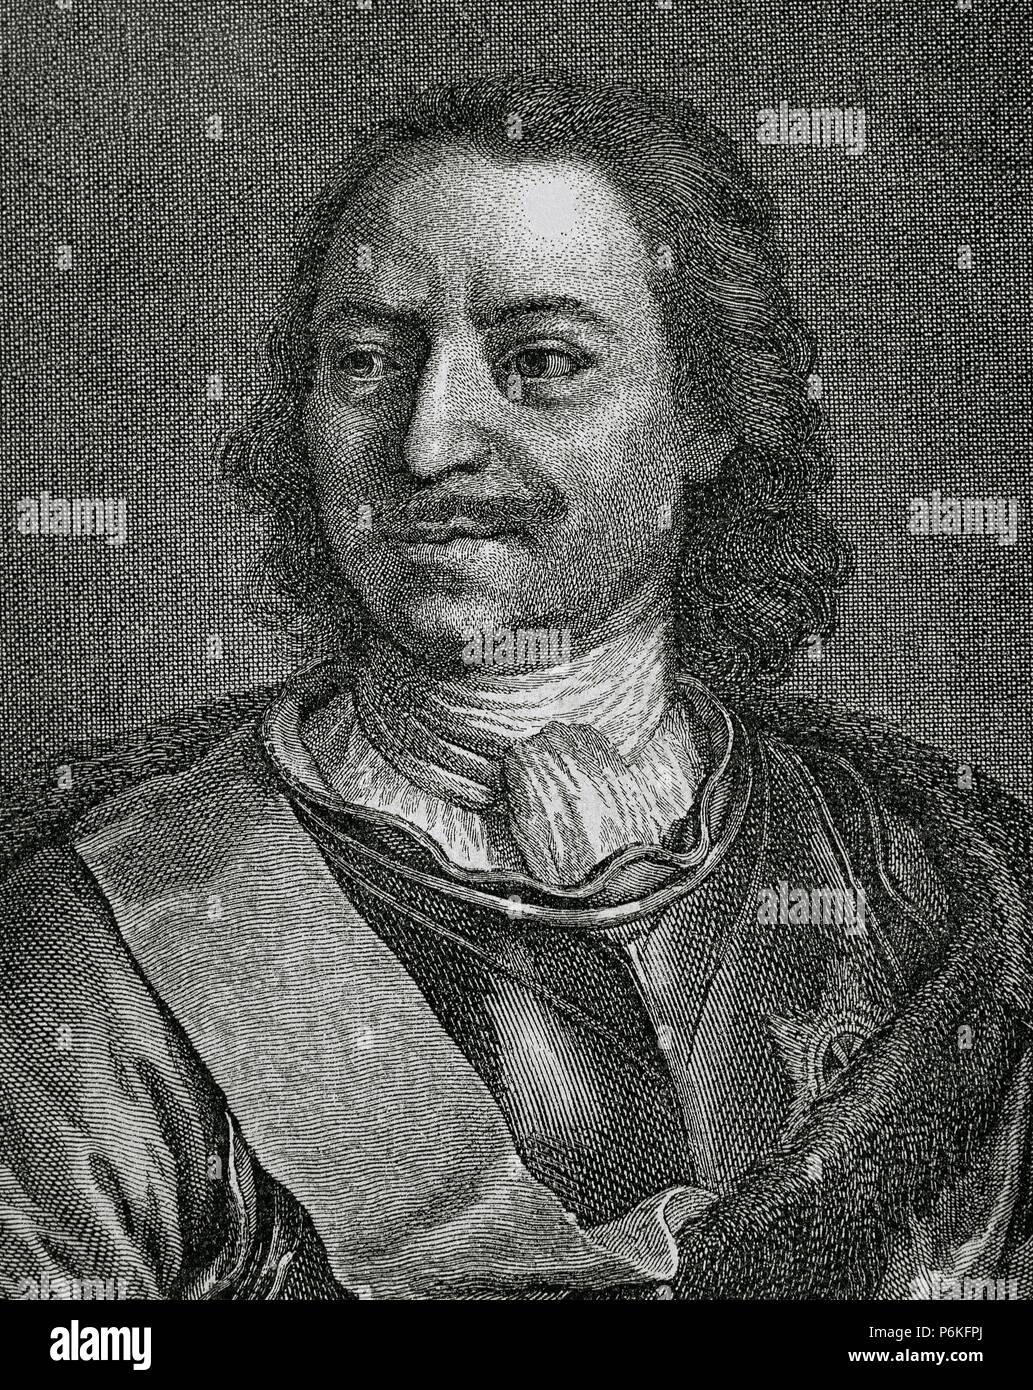 Peter the Great (1672-1725). Tsar of All Russia (1682-1721) and Emperor of All Russia (1721-1725). Portrait. Engrving. 19th century. Stock Photo